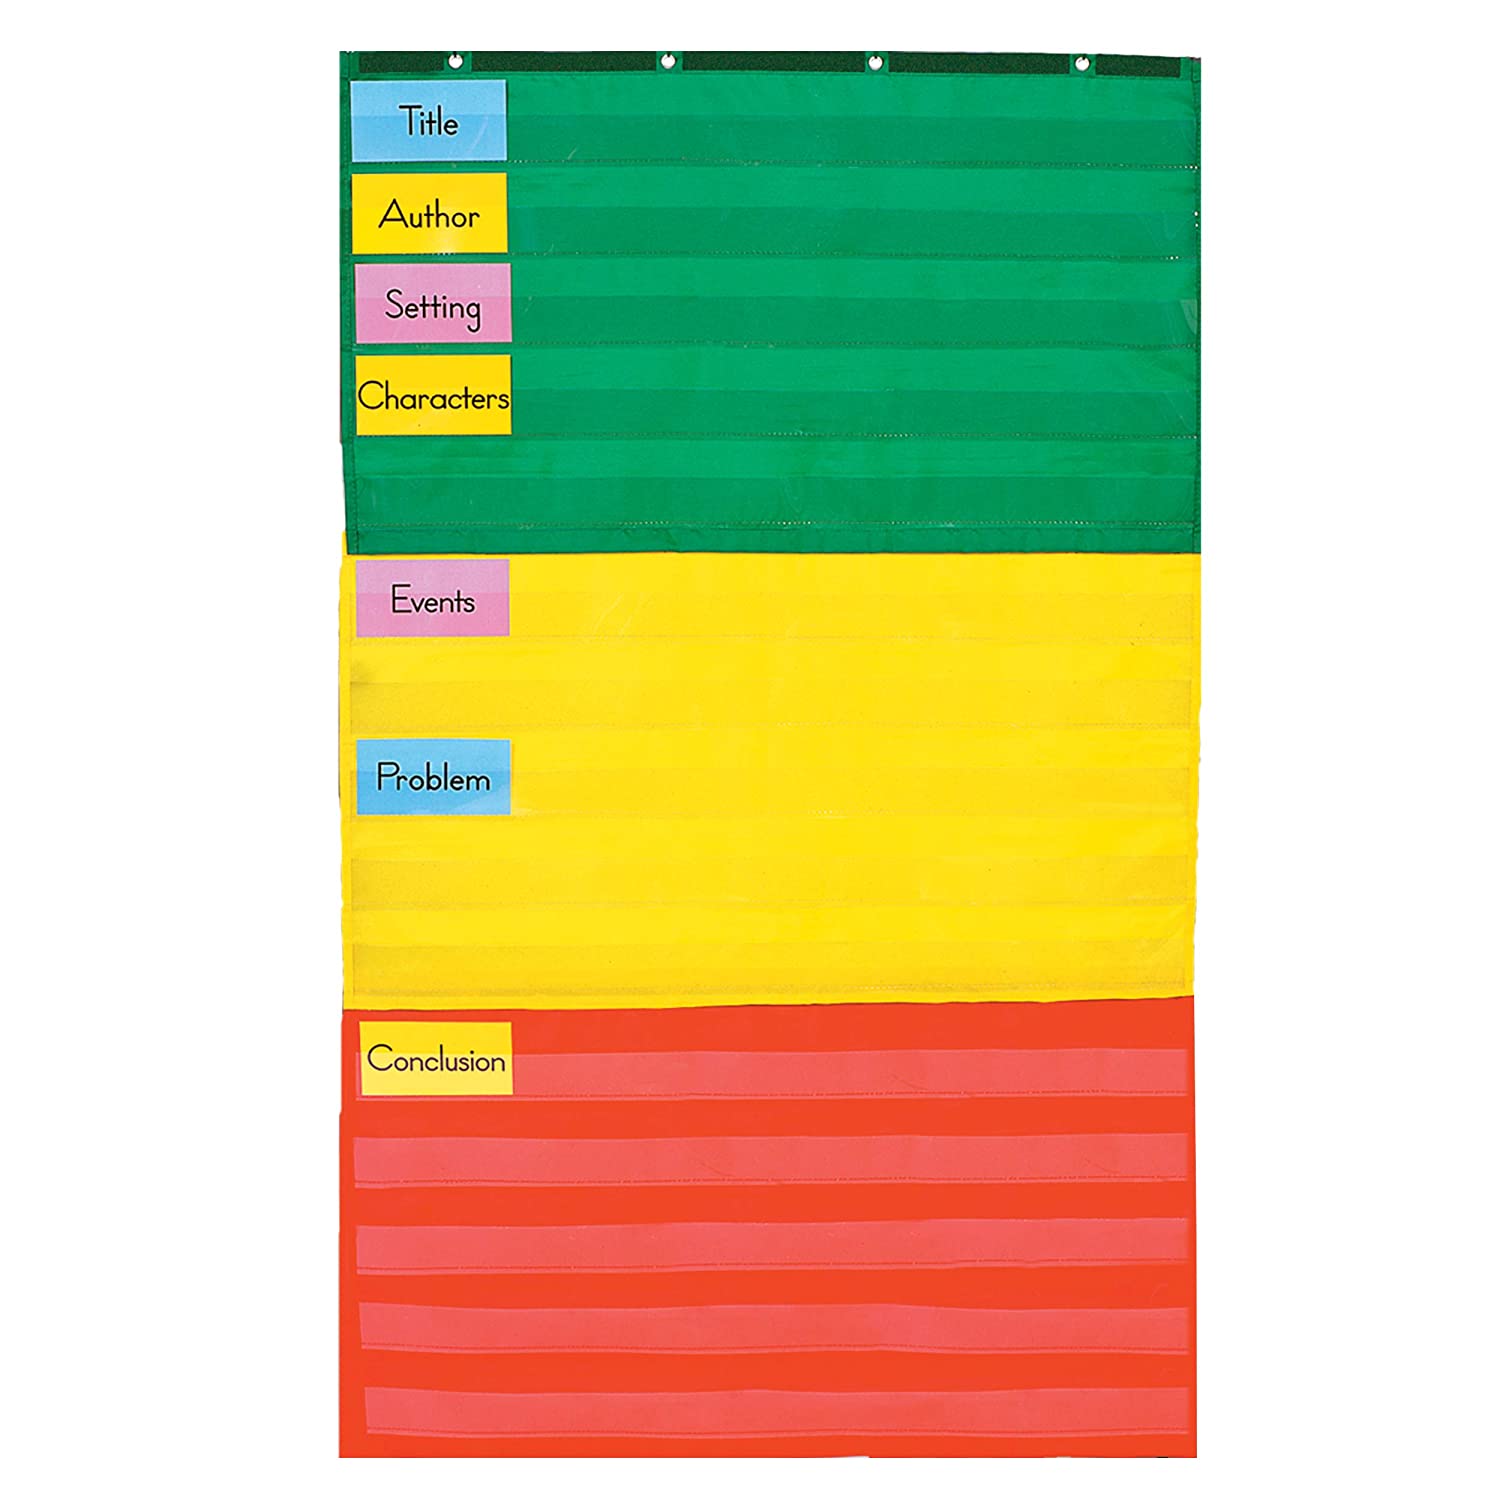 Carson-Dellosa Adjustable Pocket Chart Multi-Purpose Educational and Organizational Tool, Assorted Color Header Cards; Red, Yell